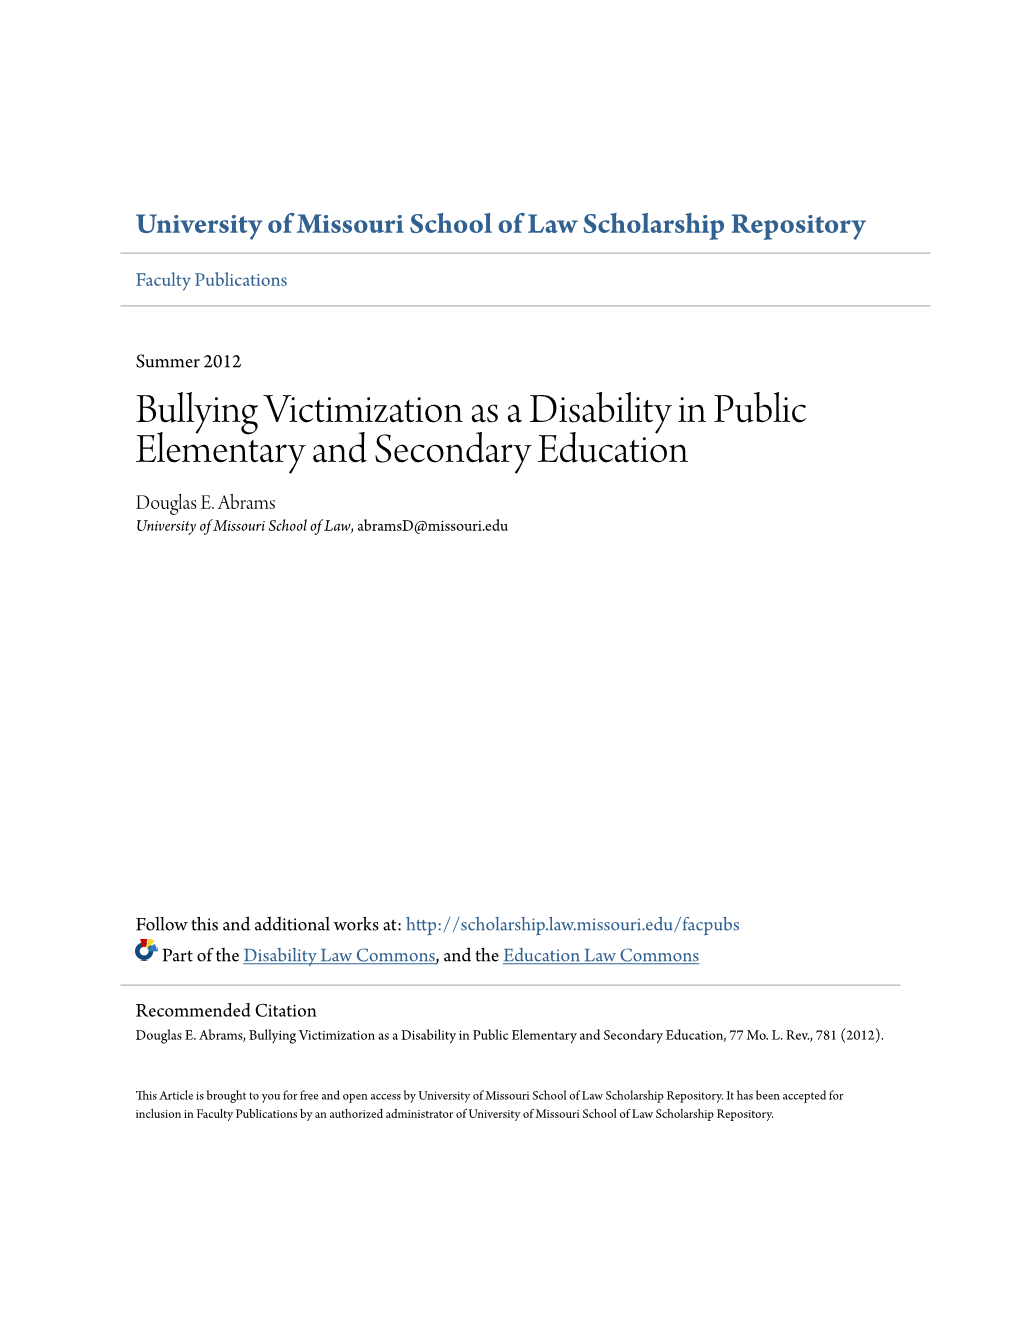 Bullying Victimization As a Disability in Public Elementary and Secondary Education Douglas E